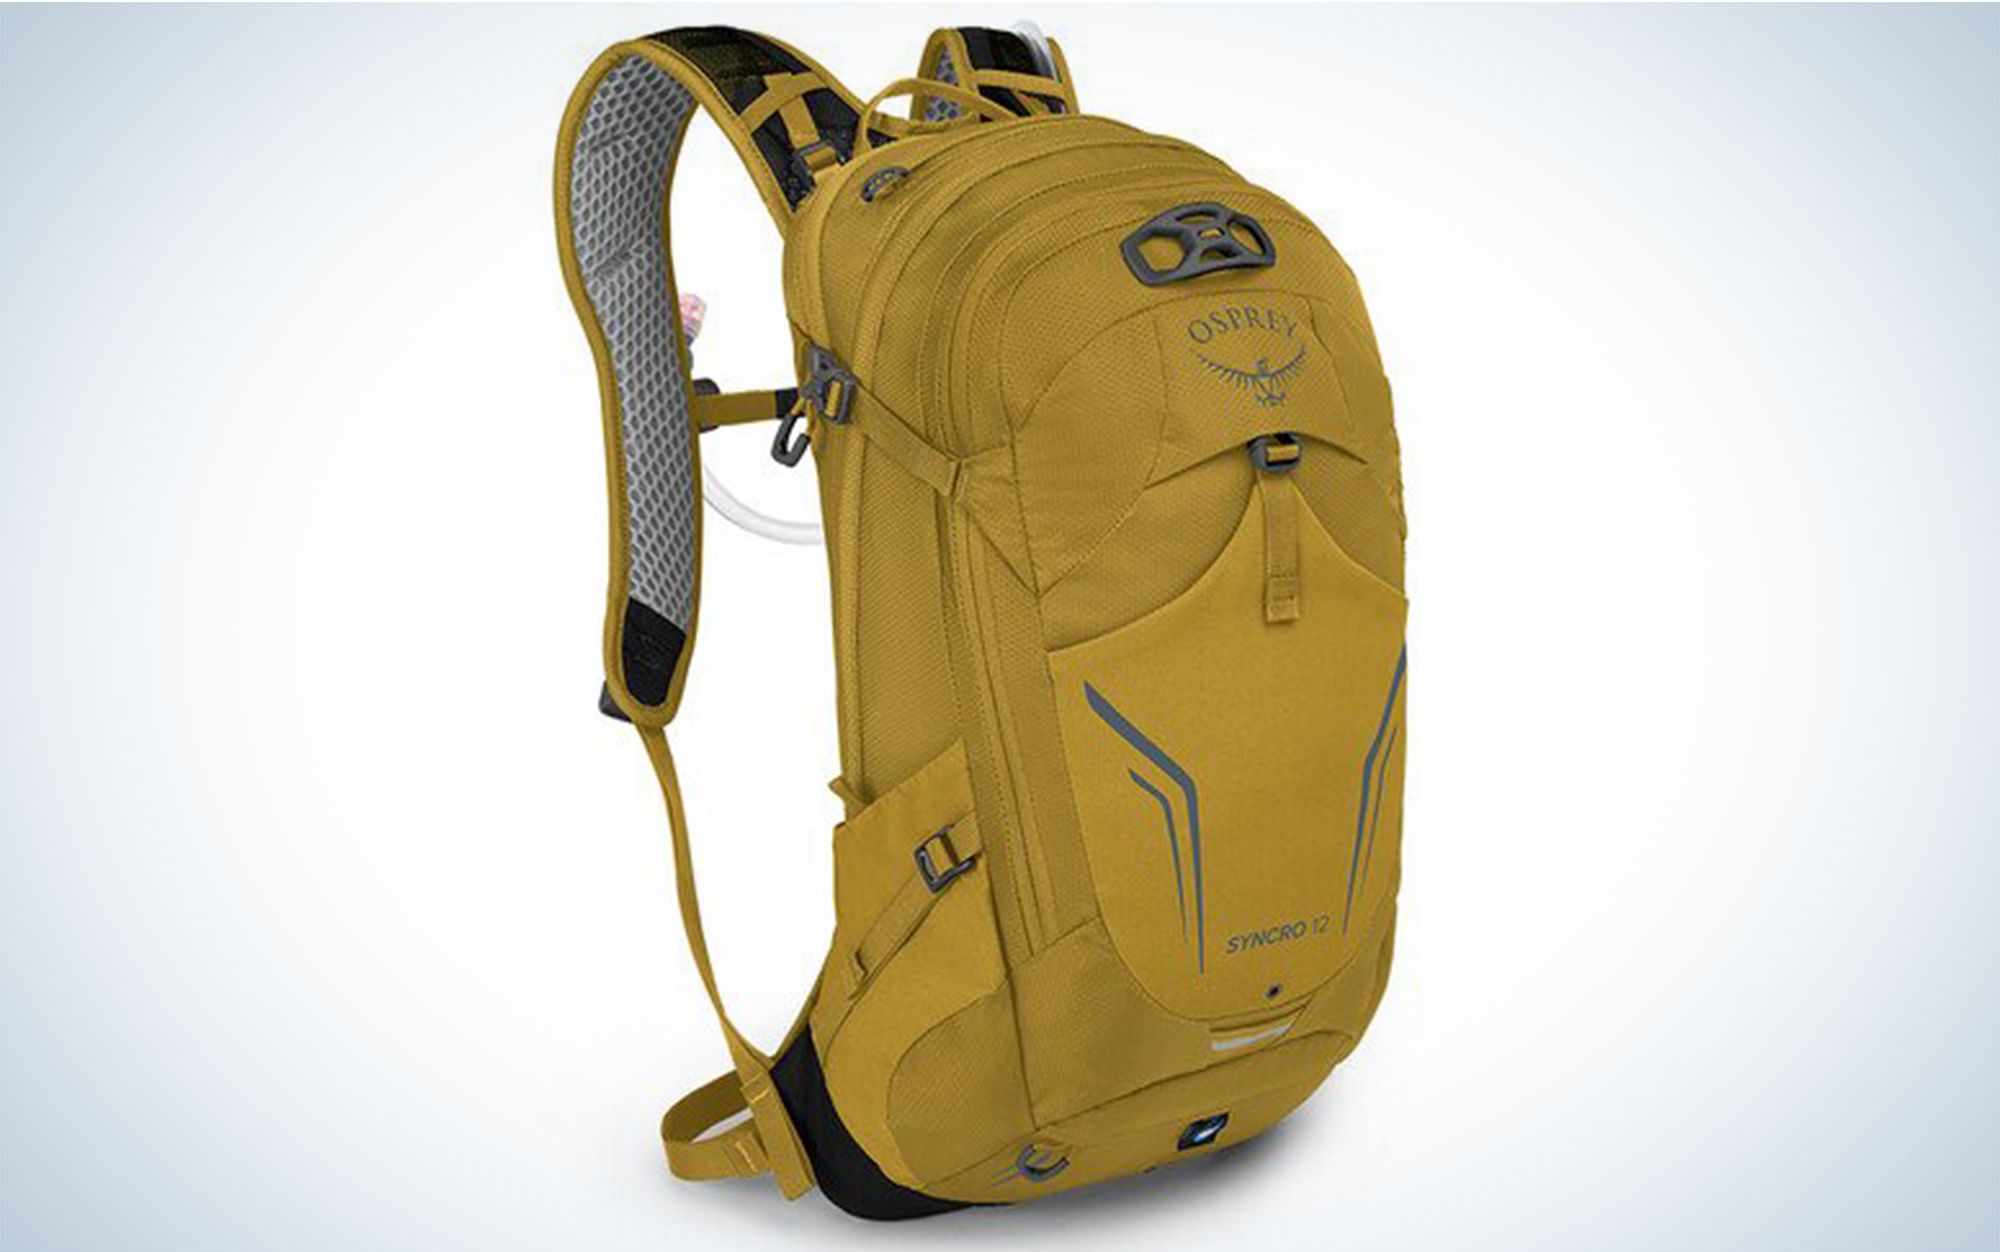 The Osprey Syncro is one of the best hiking daypacks.